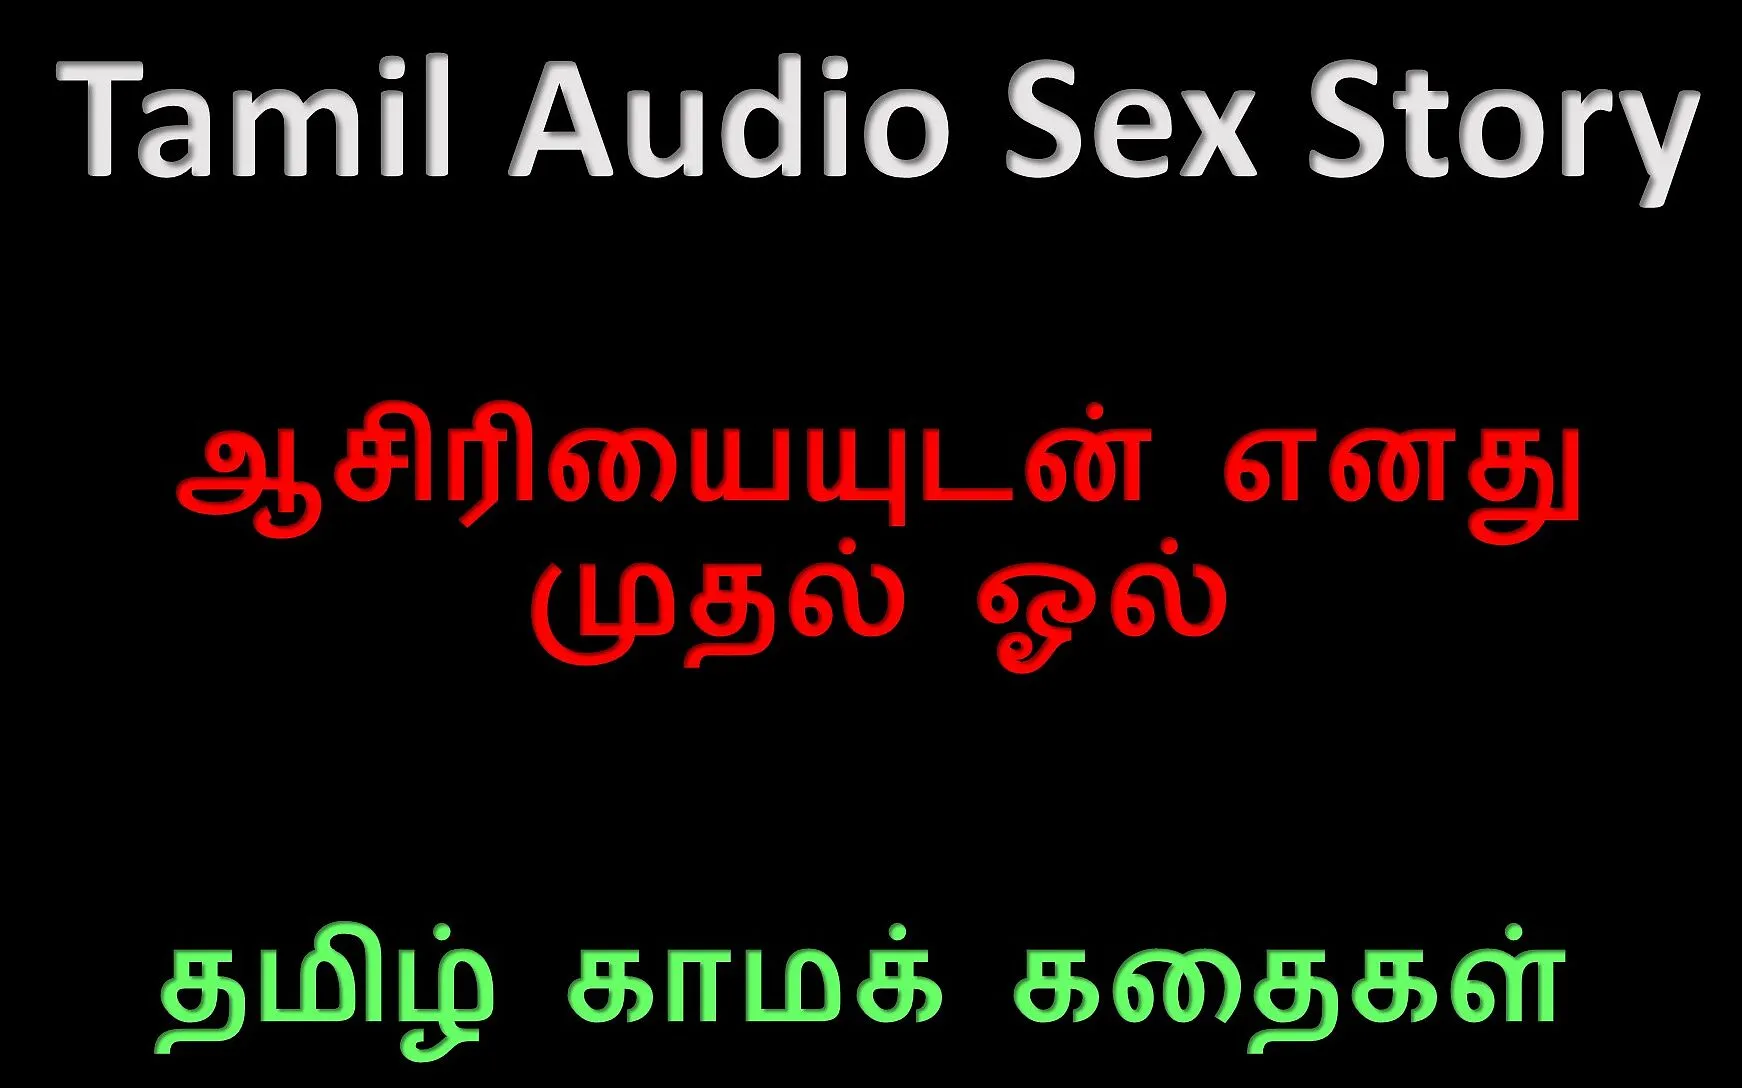 adrienne neff recommends Tamil Font Sex Story